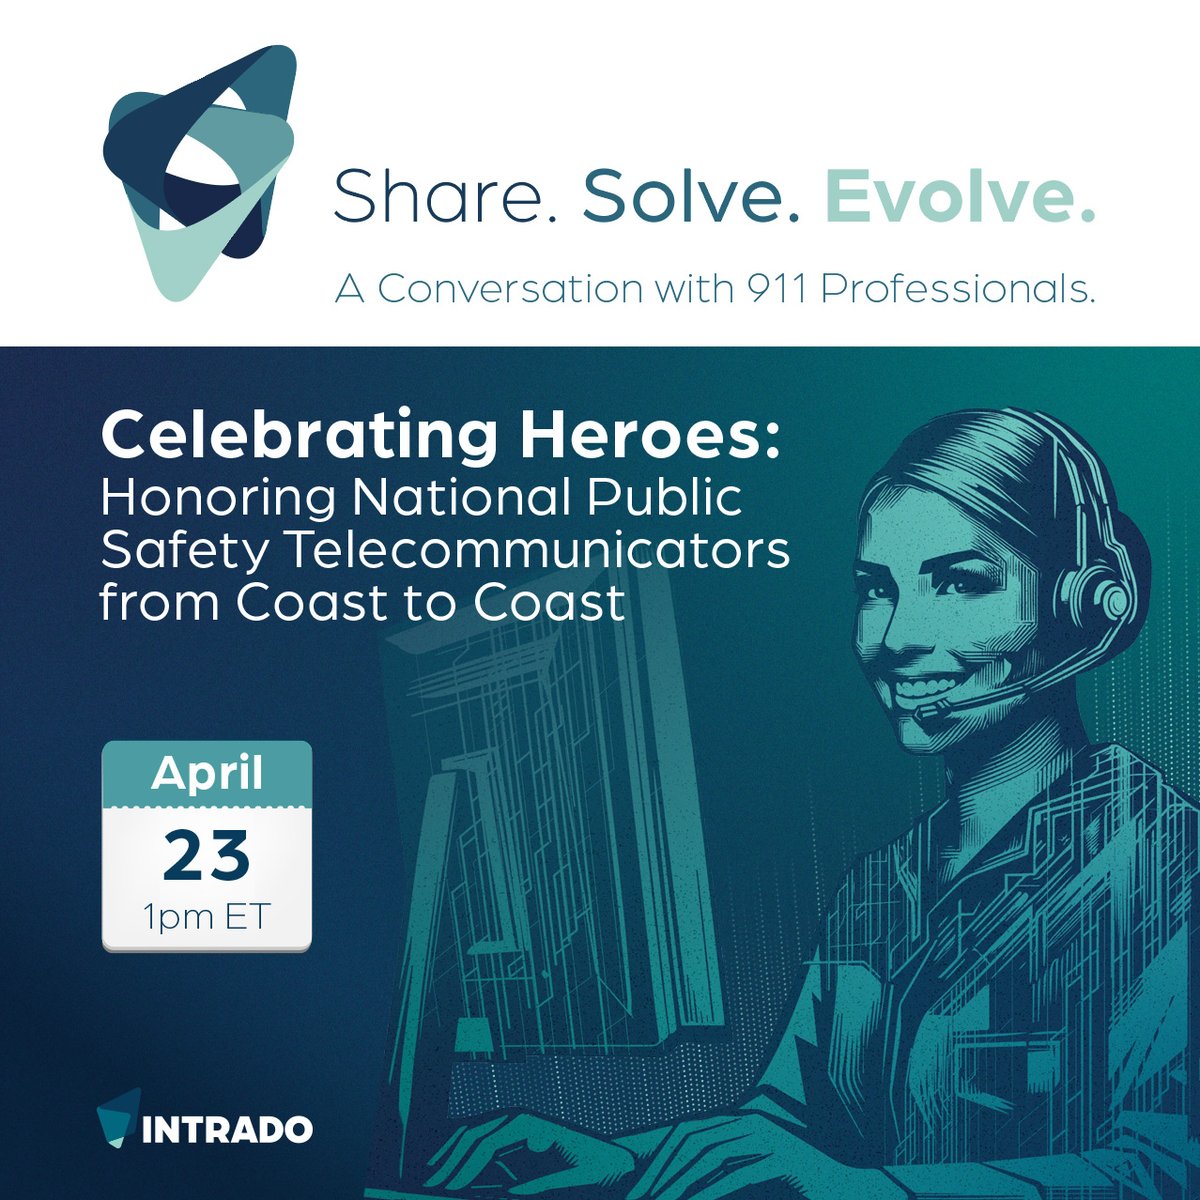 Join us on April 23 at 1PM EST to hear inspiring stories from #PSAP & #ECC personnel. These professionals are the first responders in emergencies, providing vital support. Gain insight into their dedication, resilience, and daily challenges.

Register now: hubs.la/Q02t0Mlr0